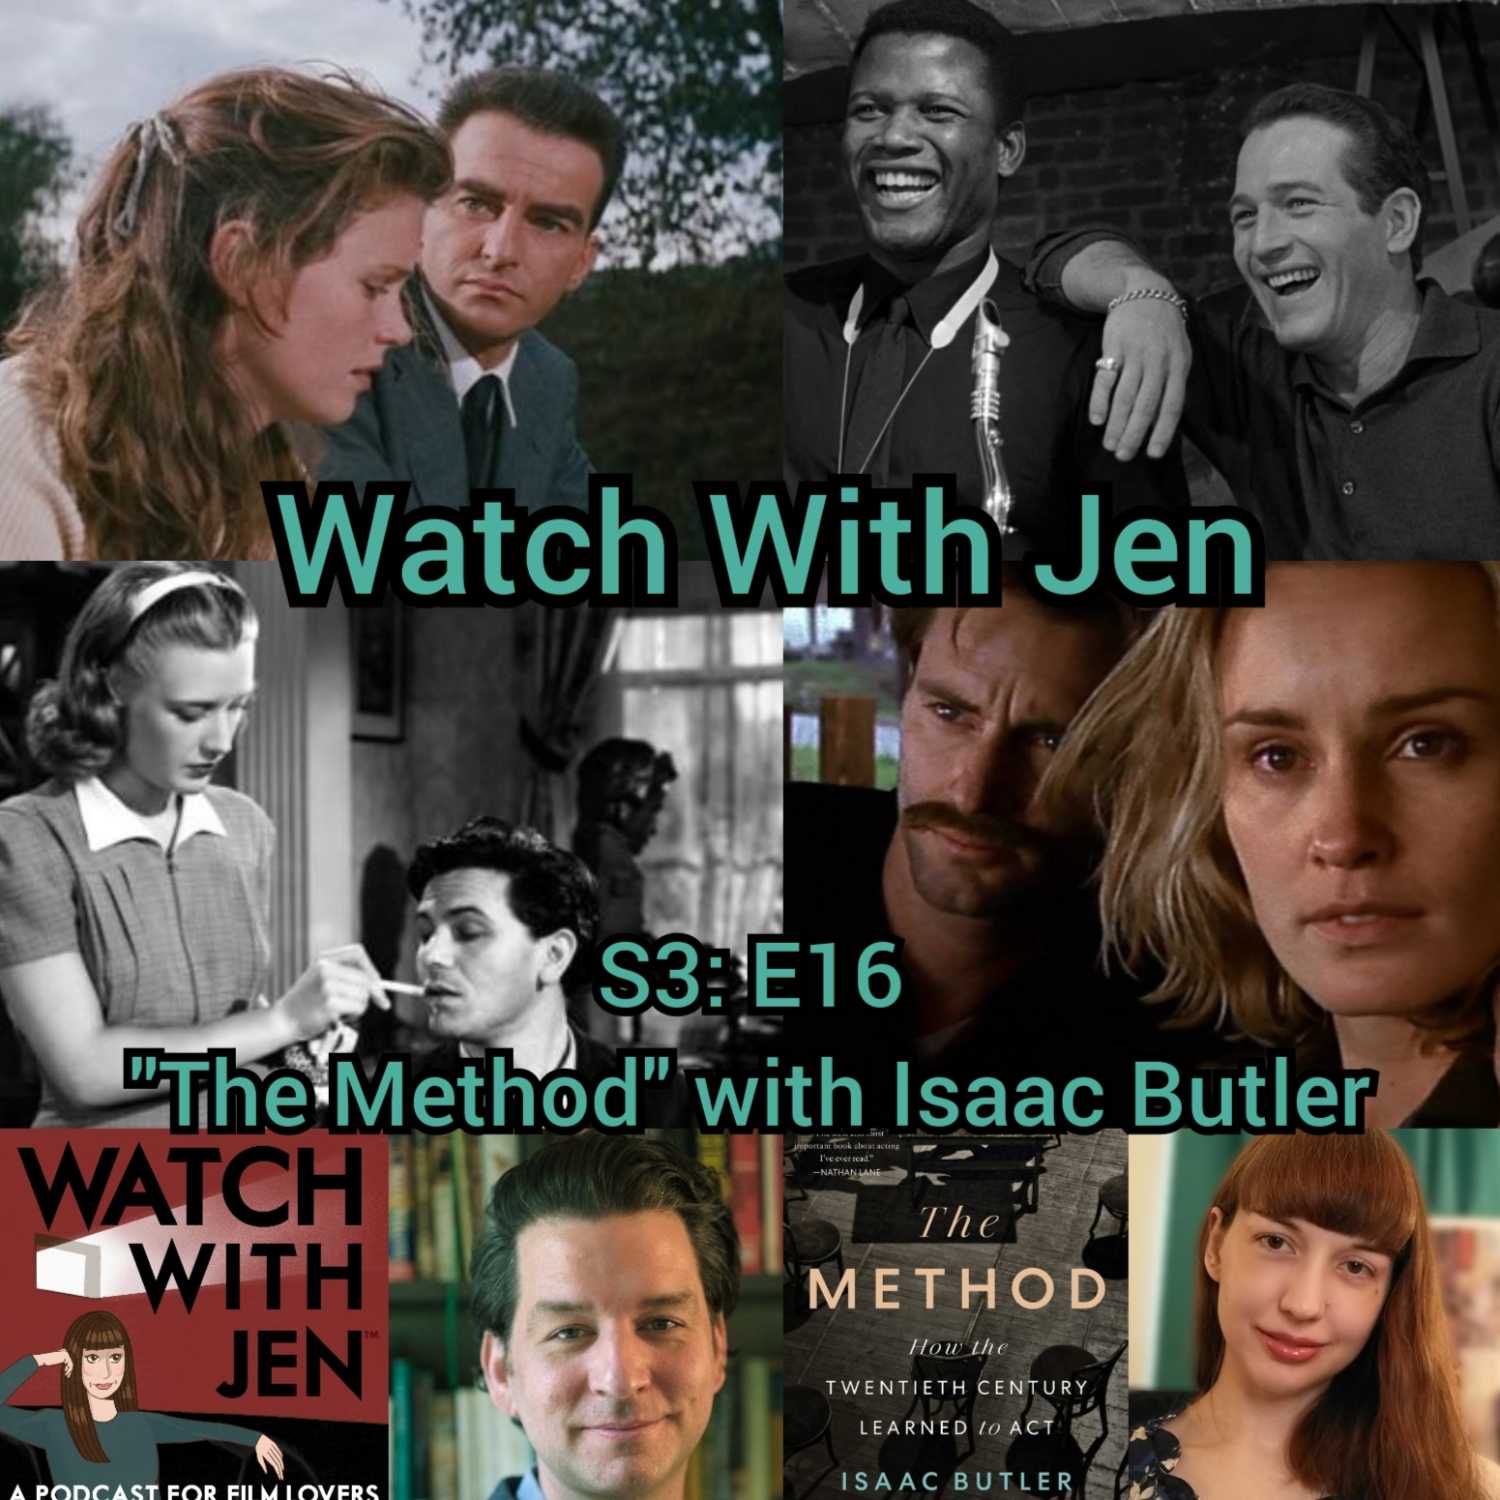 Watch With Jen - S3: E16 - ”The Method” with Isaac Butler